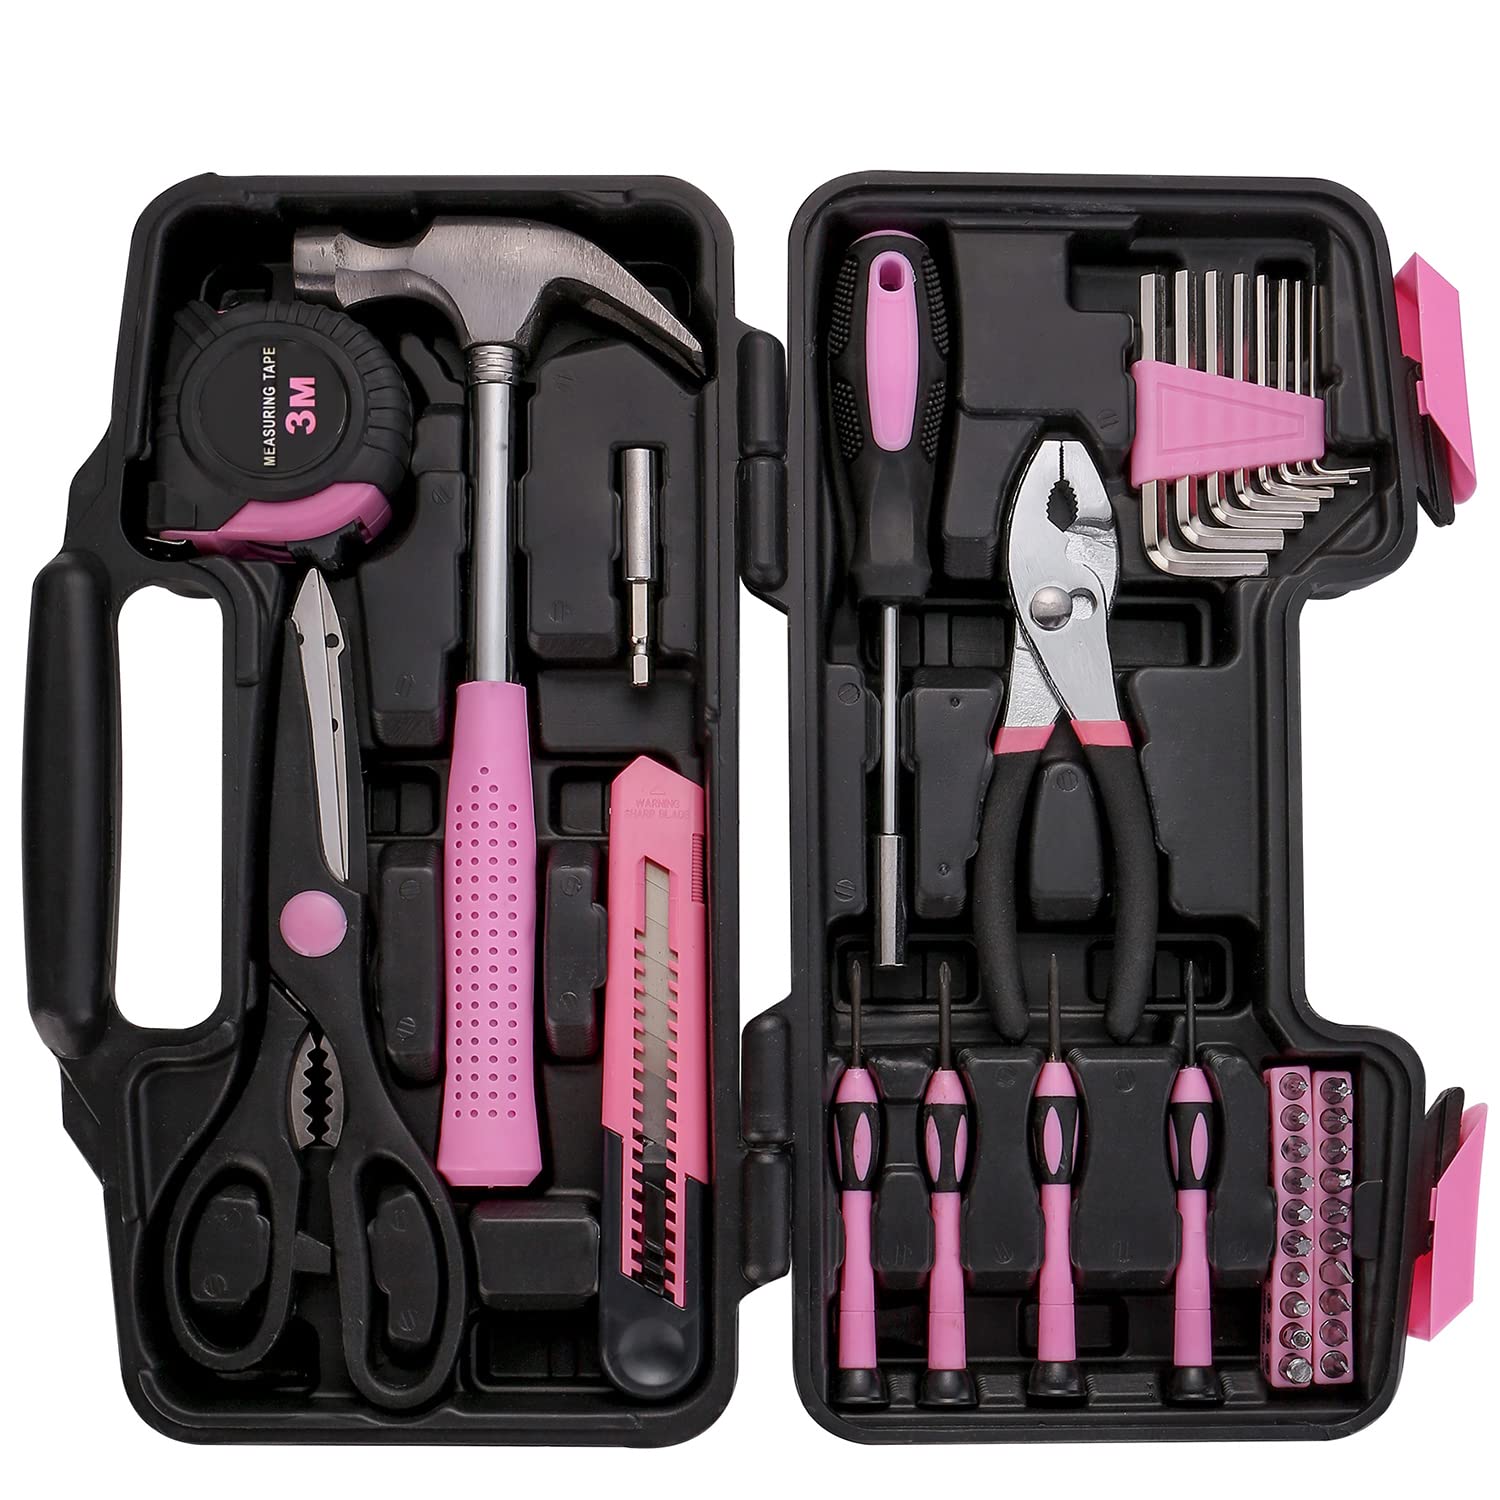 39-Piece All Purpose Household Pink Tool Kit for Girls, Ladies and Women - Includes All Essential Tools for Home, Garage, Office and College Dormitory Use